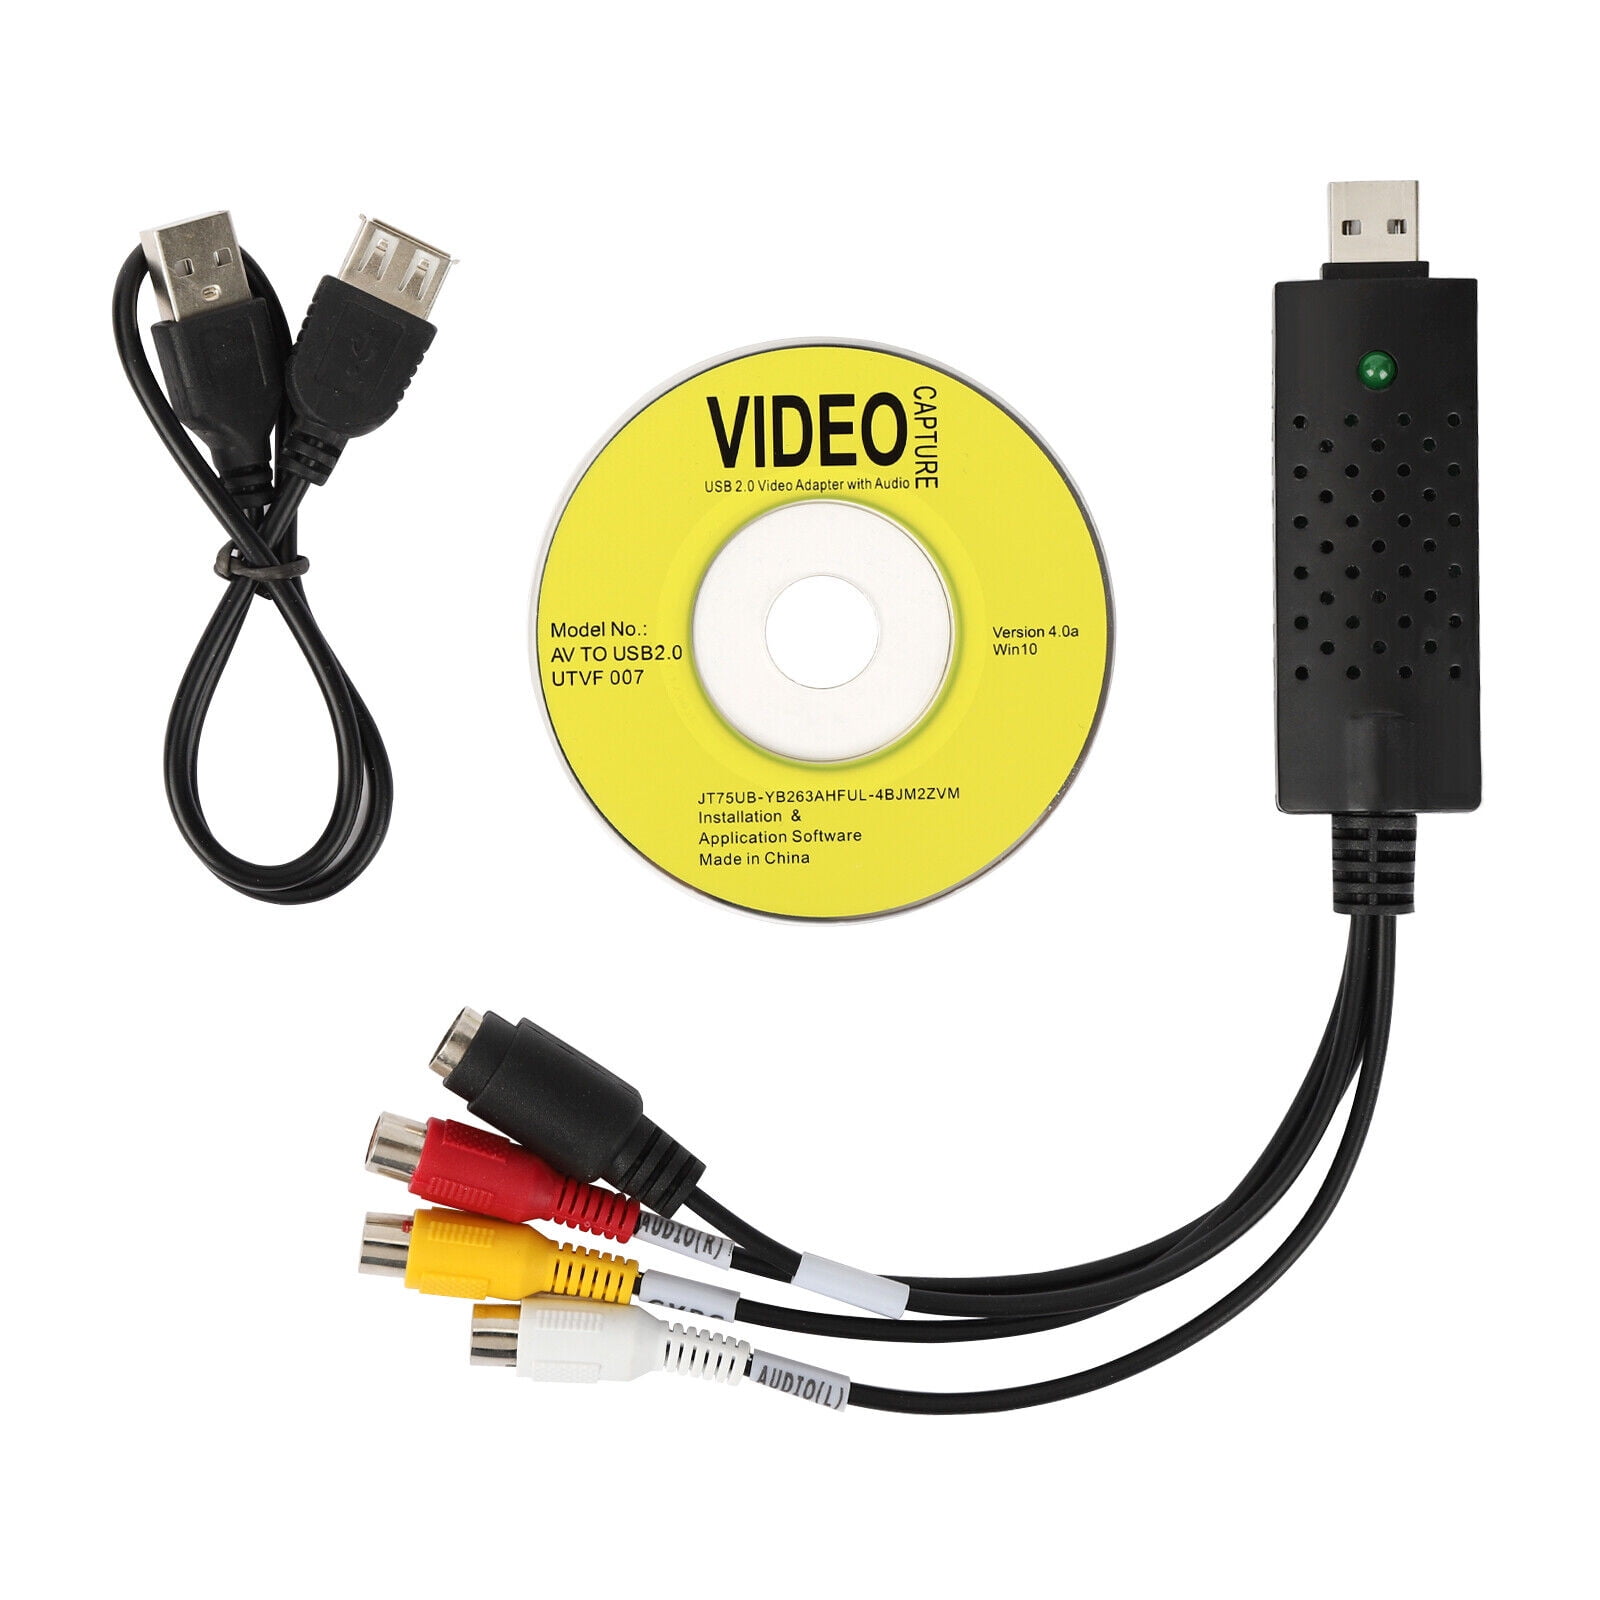 EasyCAP USB Video Capture Card Adapter For TV, DVD, VHS, Audio And AV Video  Connectors Ideal For Computer And CCTV Cameras From Ihammi, $4.95